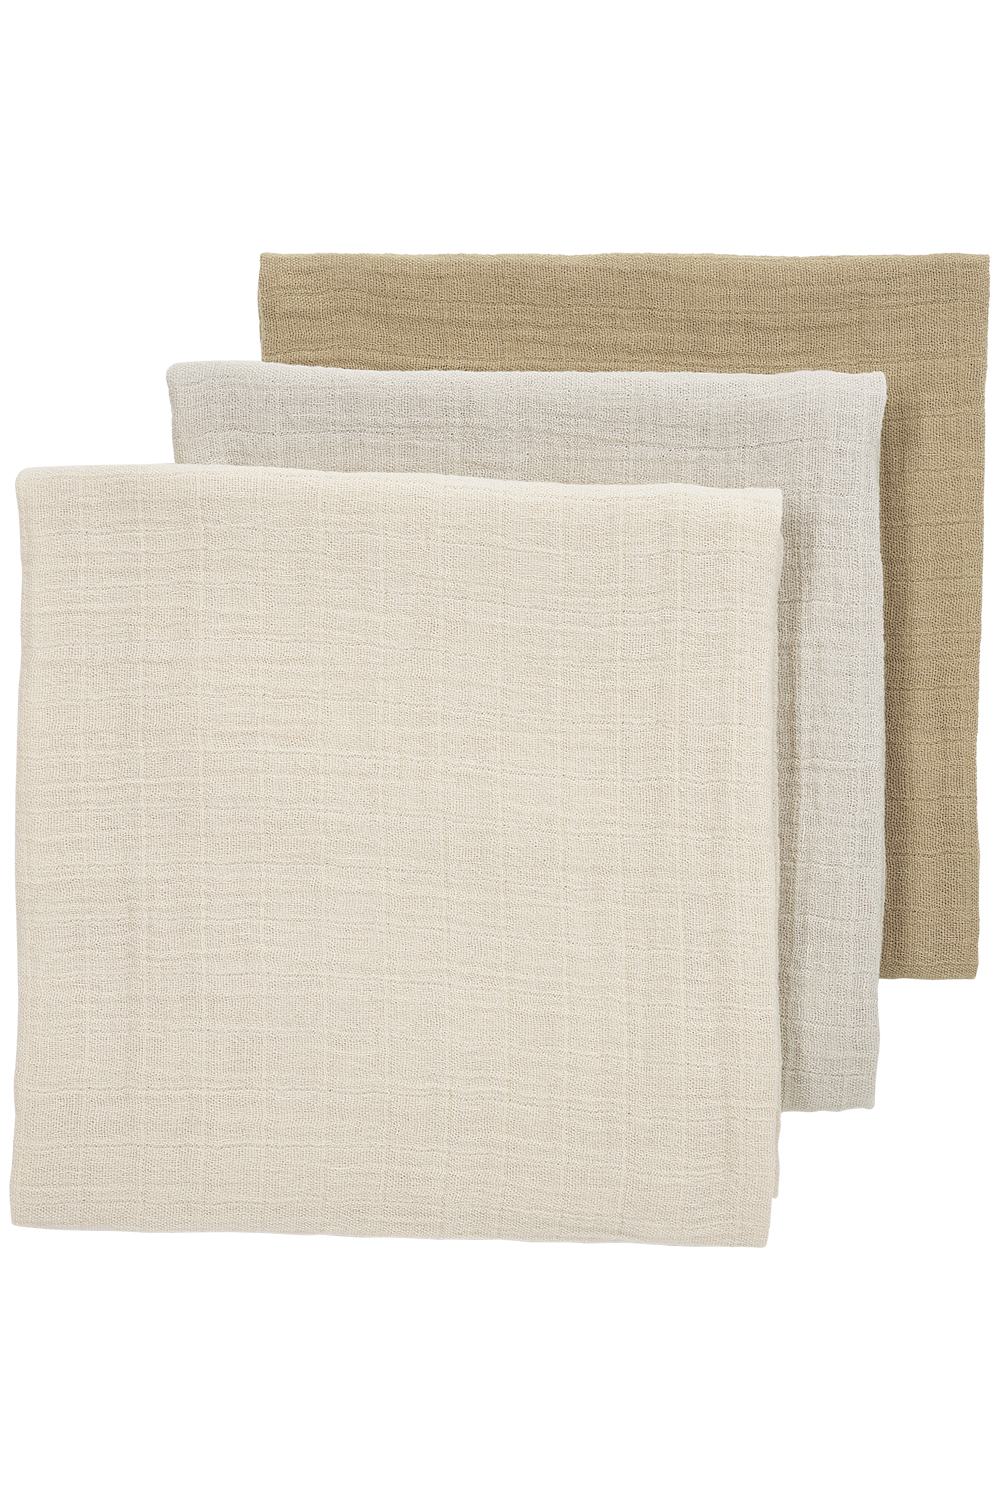 Pre-washed Musselin Mullwindeln 3er pack Uni - soft sand/greige/taupe - 70x70cm